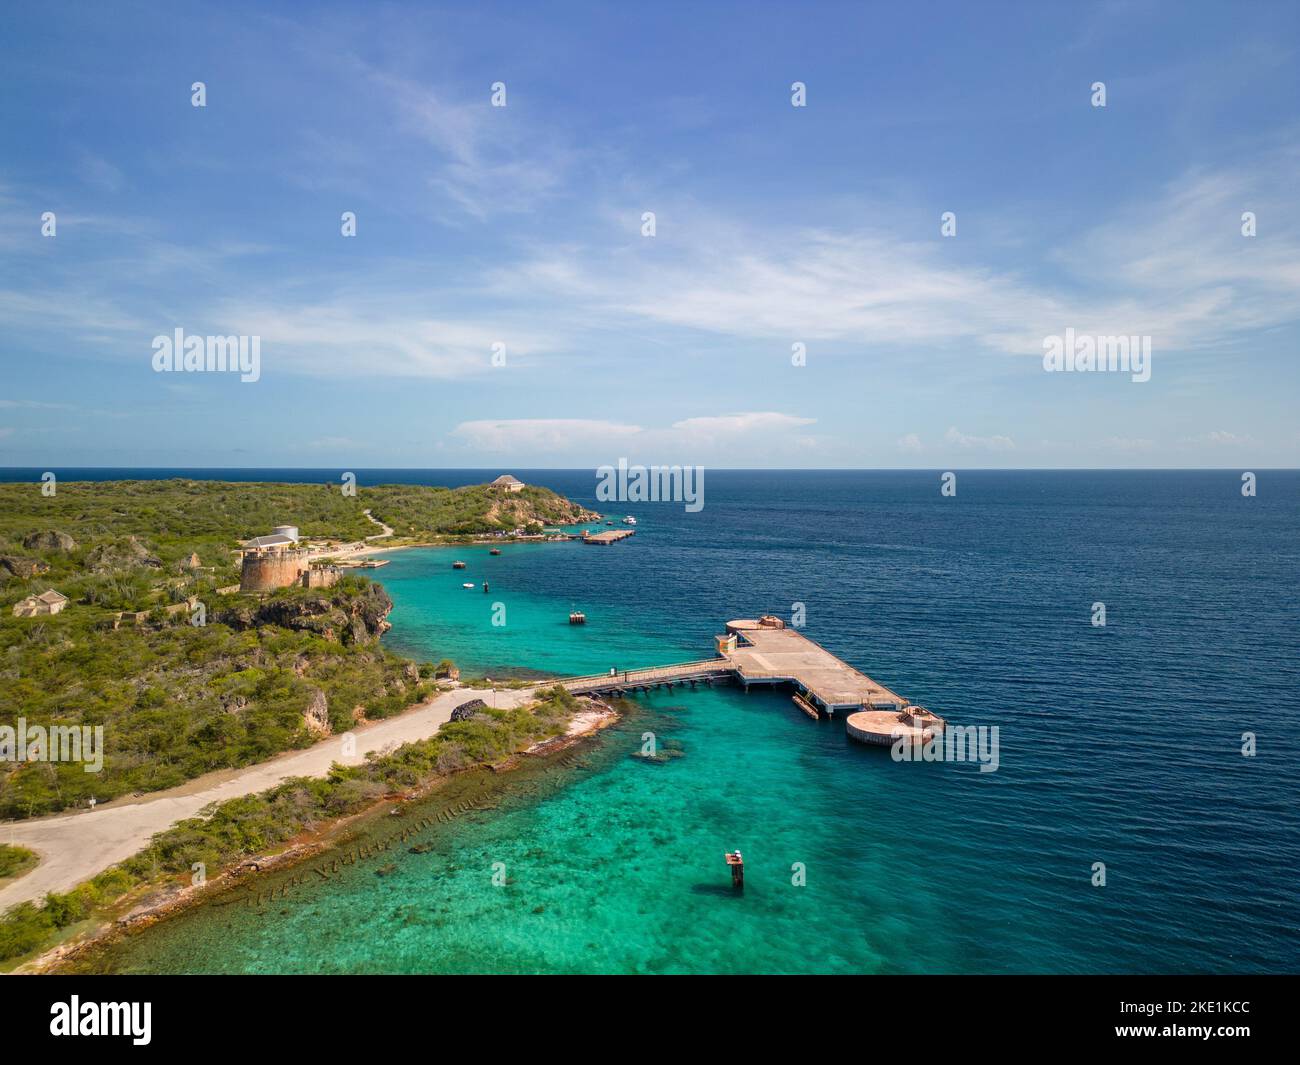 An aerial shot of the scenic Caracas Bay in Willemstad Curacao with blue seawater and skyscape Stock Photo